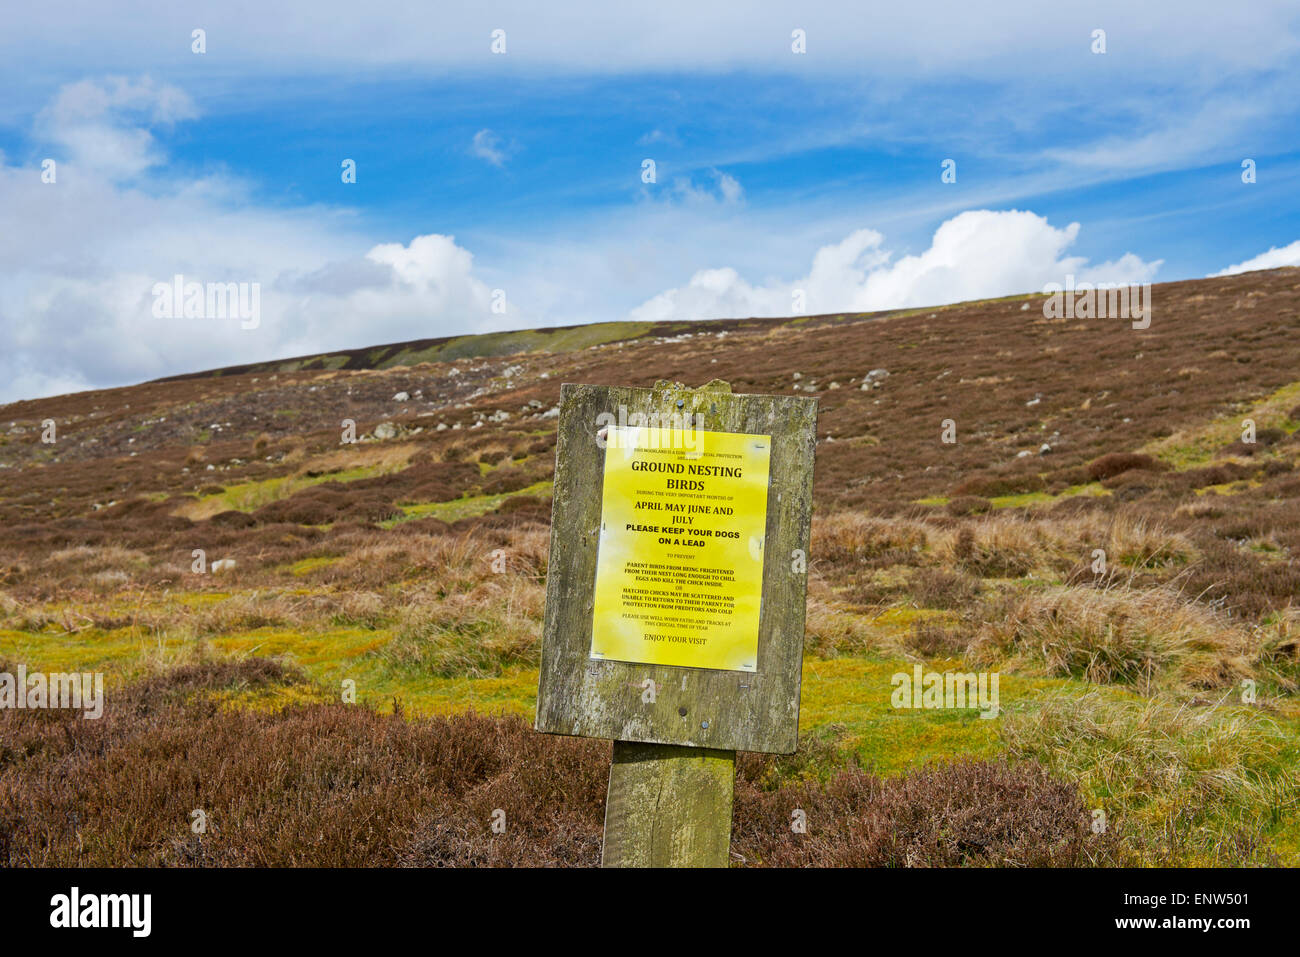 Sign asking walkers not to disturb ground nesting birds, Swaledale, Yorkshire Dales National Park, North Yorkshire, England UK Stock Photo